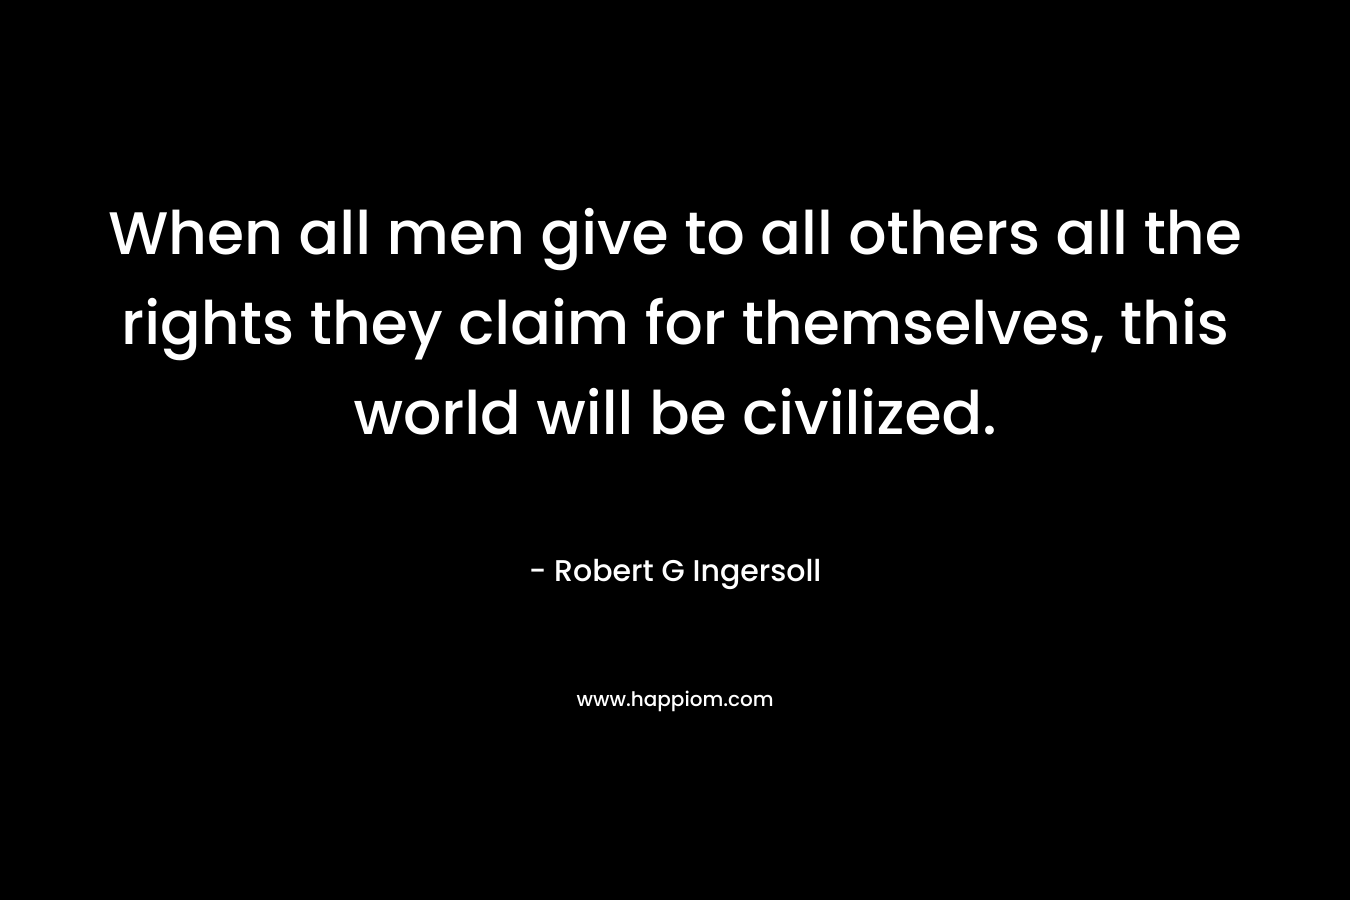 When all men give to all others all the rights they claim for themselves, this world will be civilized. – Robert G Ingersoll